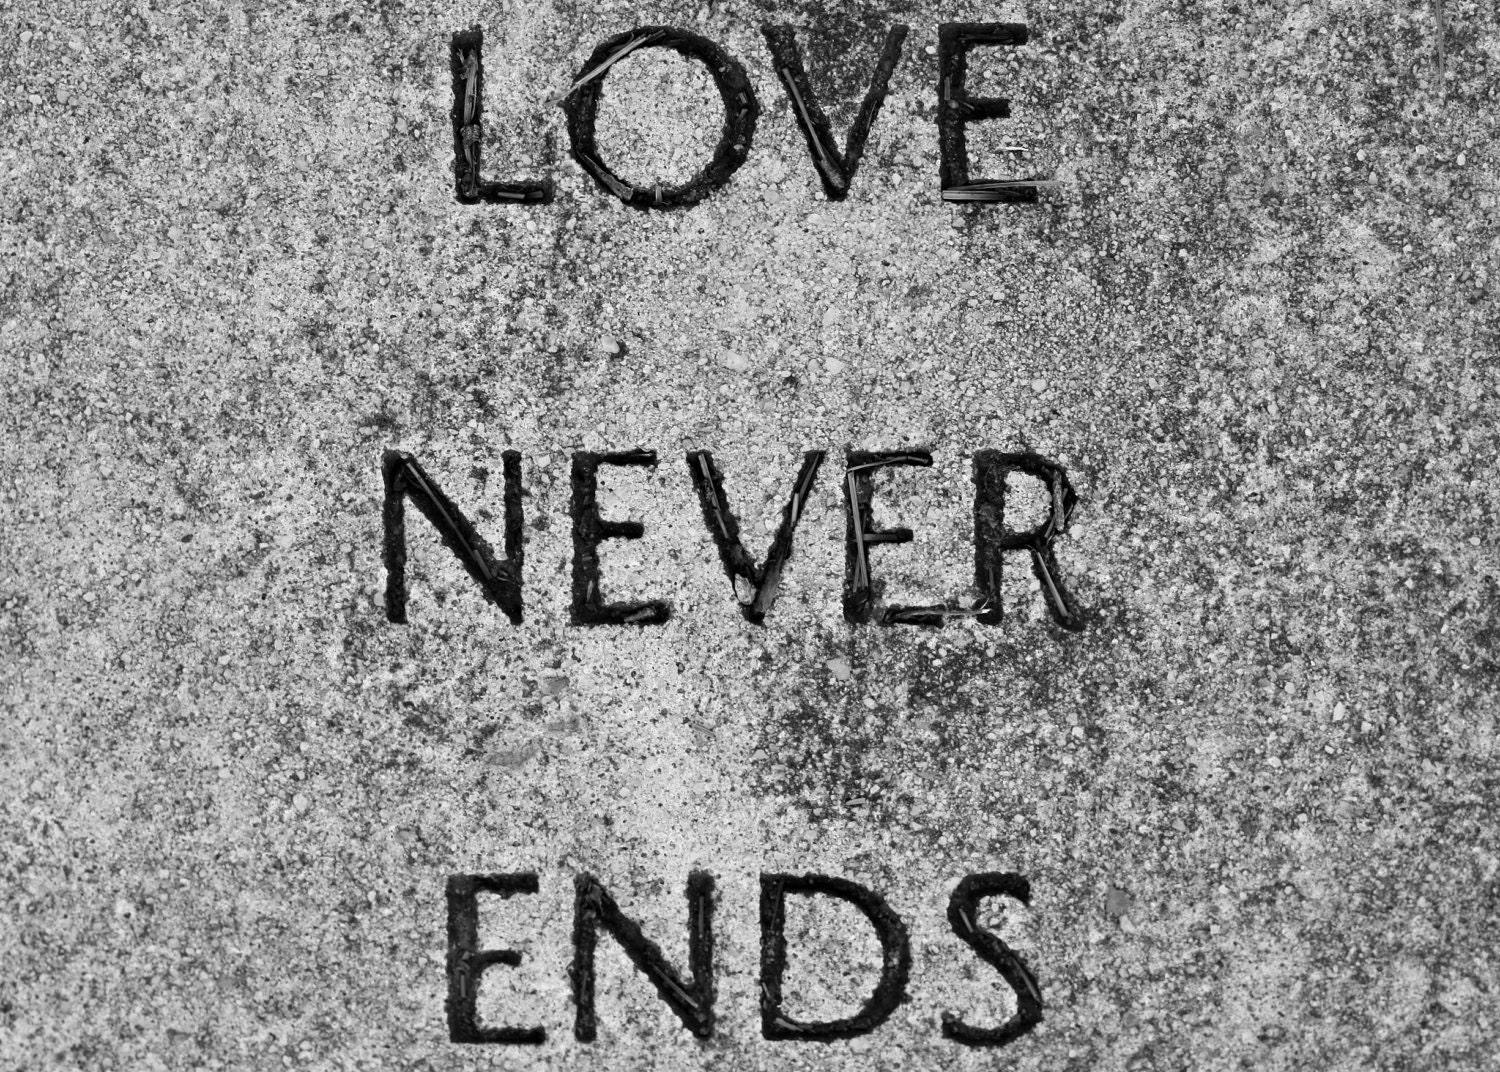 Inspirational Quote Photography. Church Yard Stone - Love Never Ends.